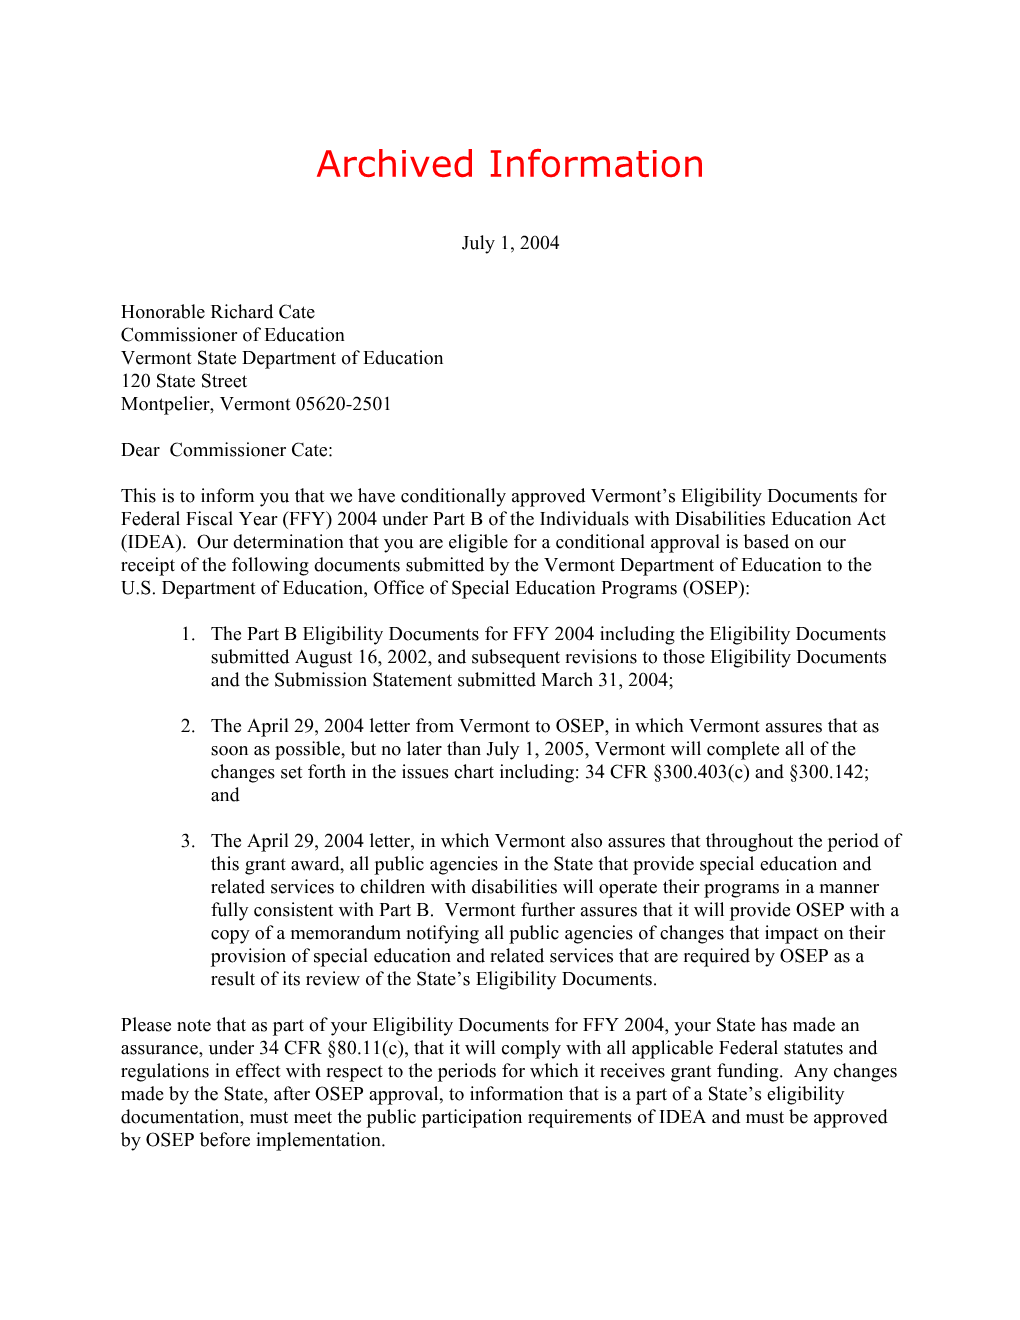 Archived: 2004 Vermont Individuals with Disabilities Act (IDEA) Part B Grant Award Letter